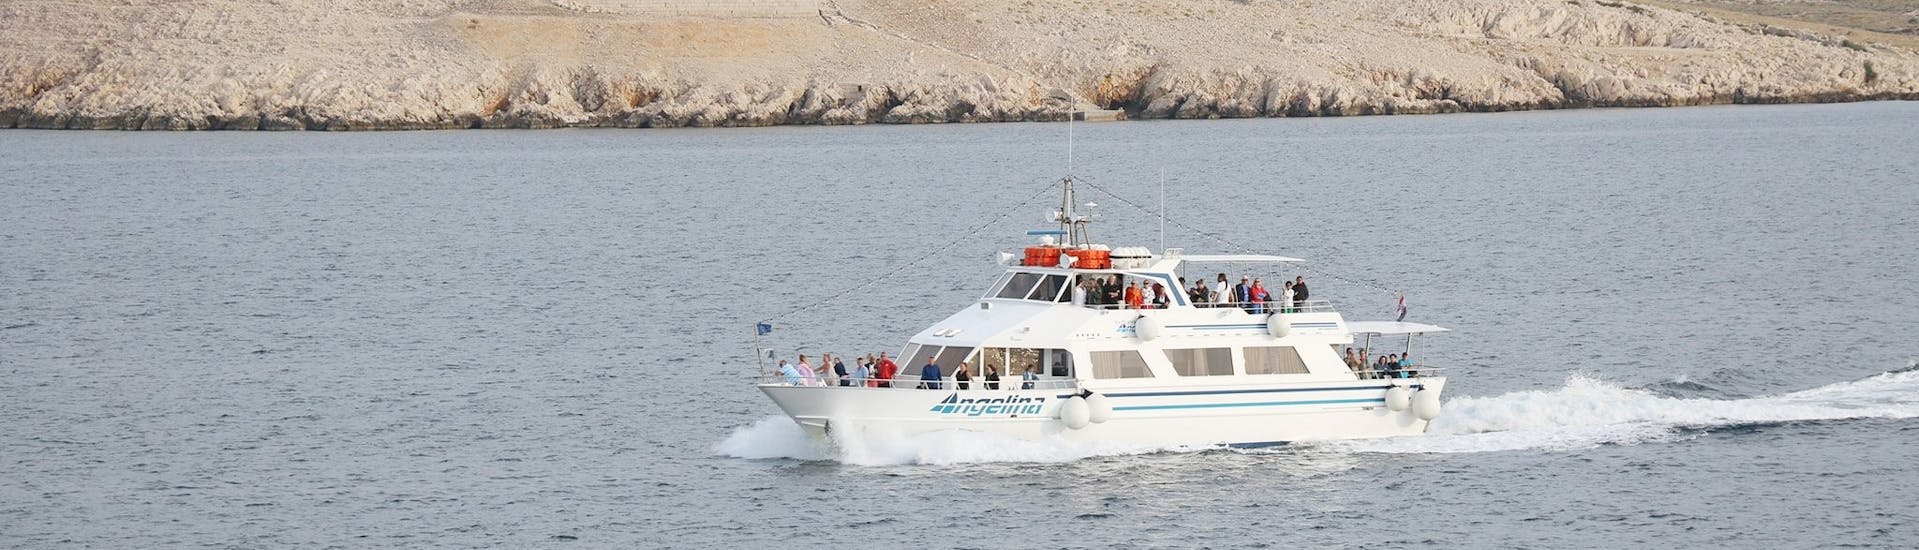 The boat of Angelina Boat Tour Baška during the trip to Zavratnica and the Island of Rab.